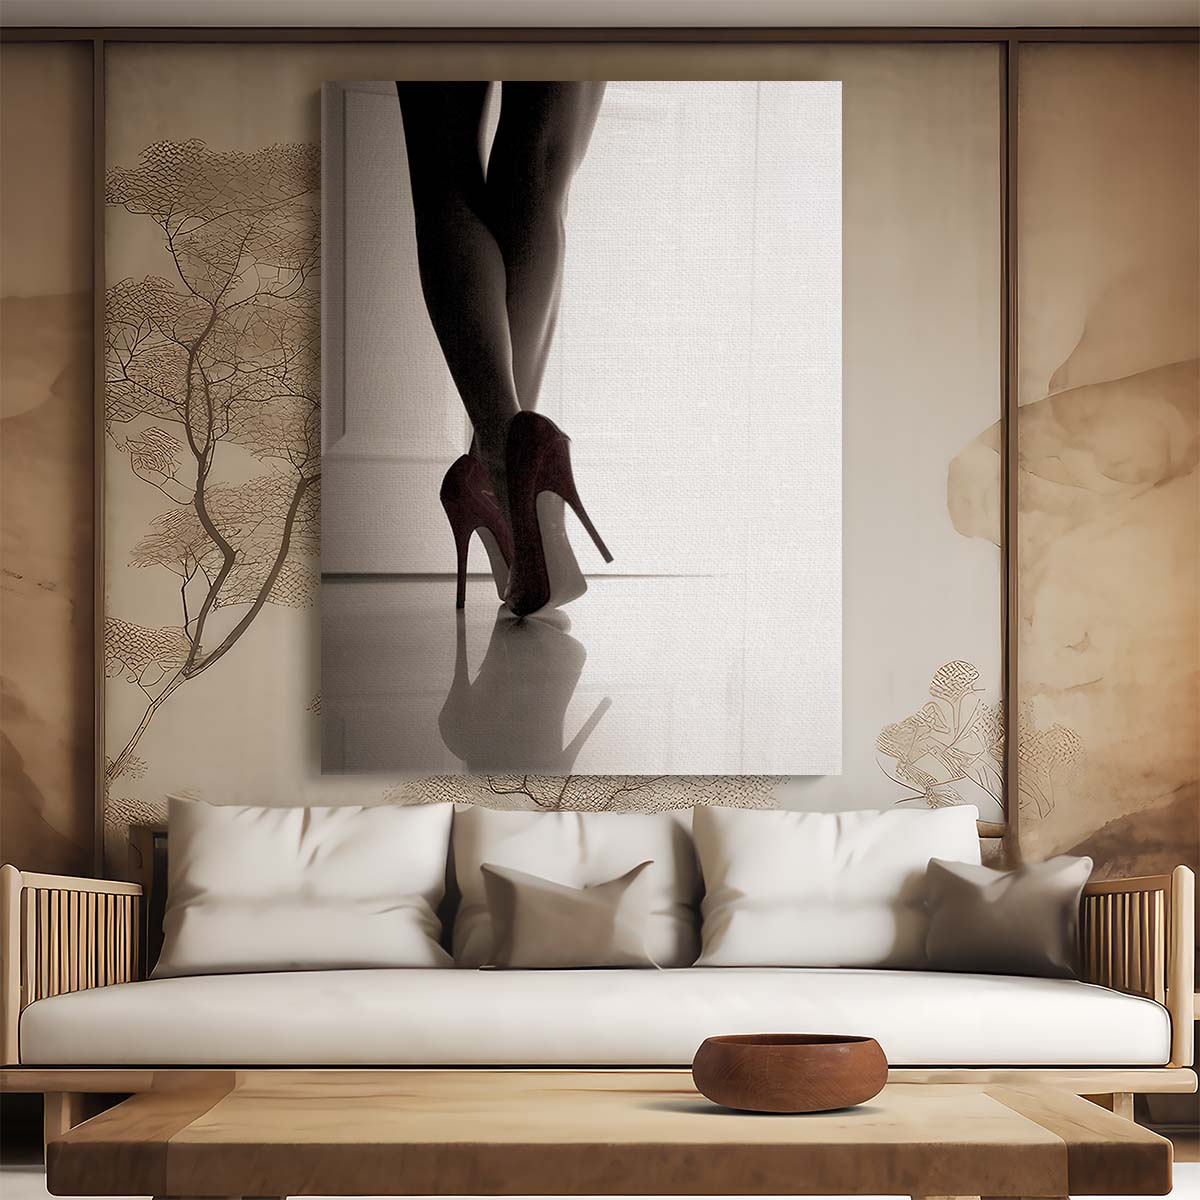 Sensual Abstract Photography - Woman in High Heels at Doorway by Luxuriance Designs, made in USA